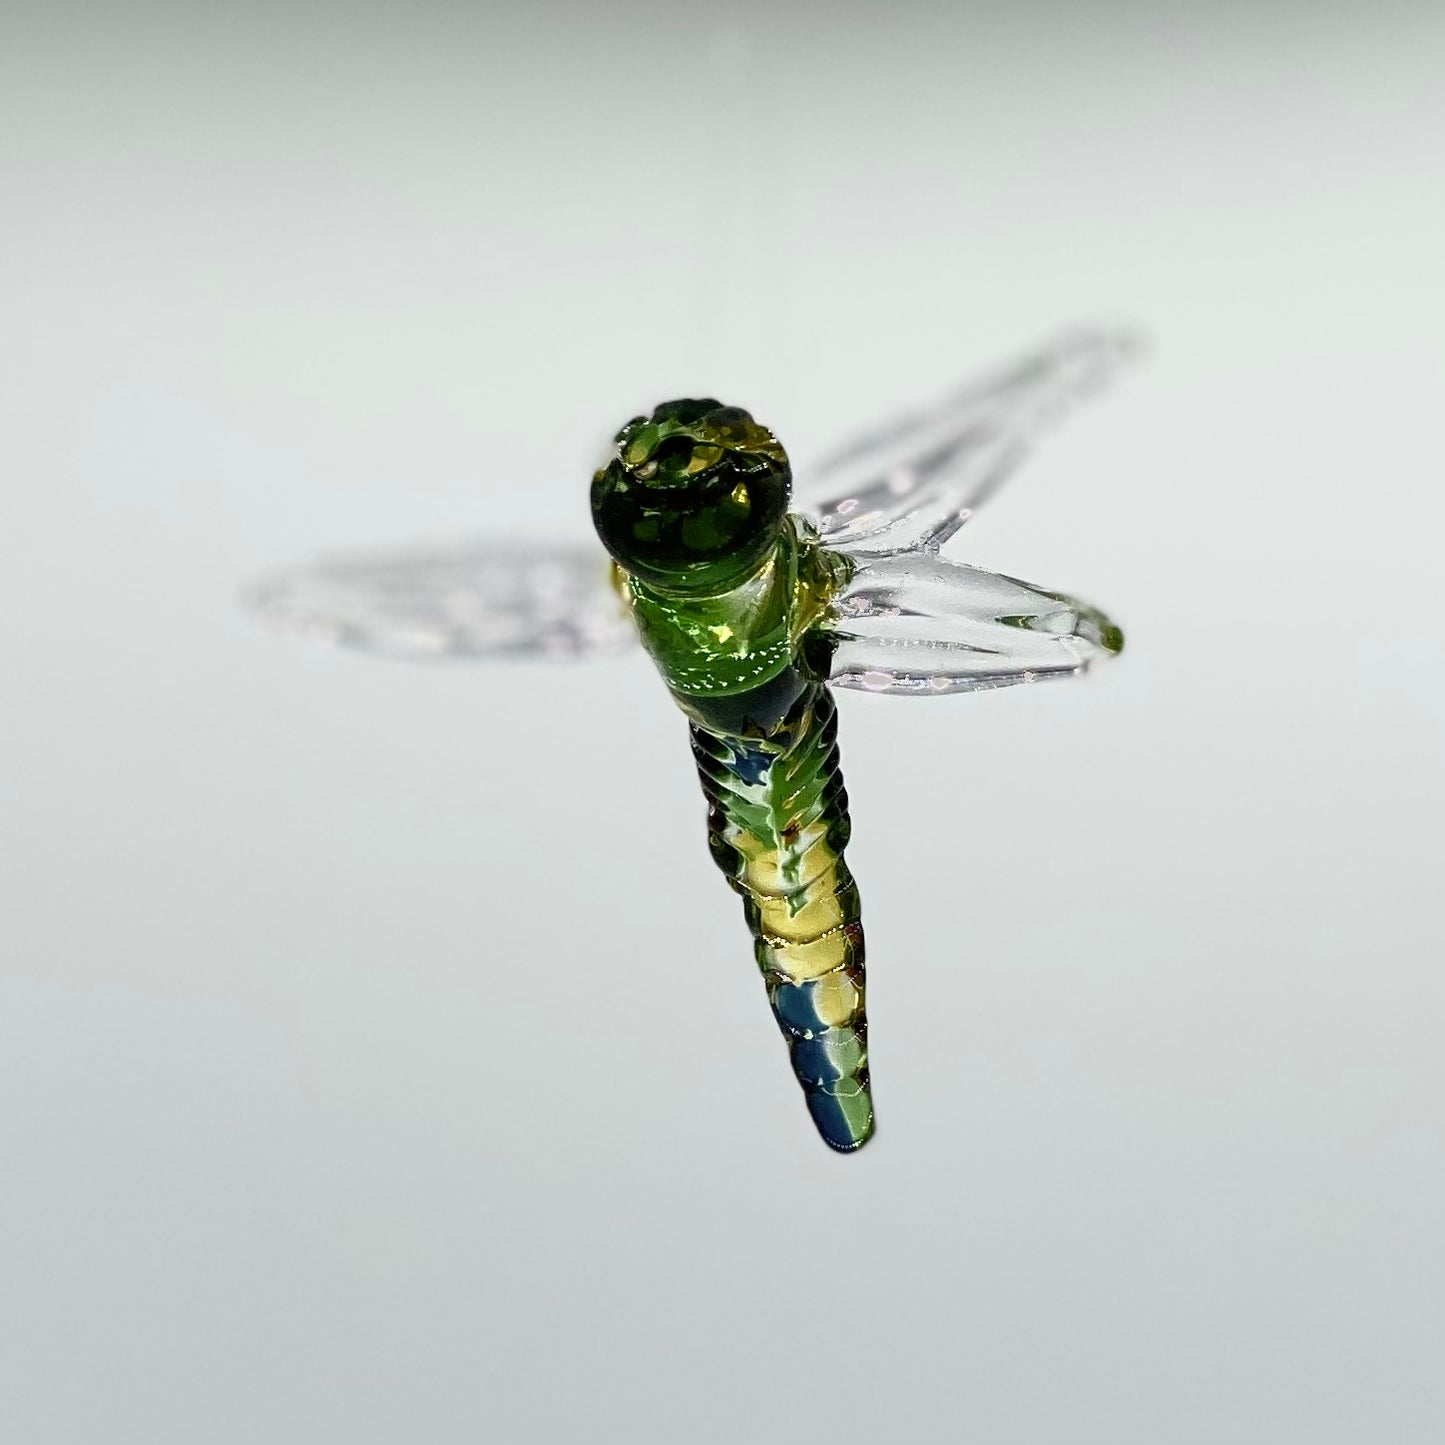 Dragonfly by Glass Roots